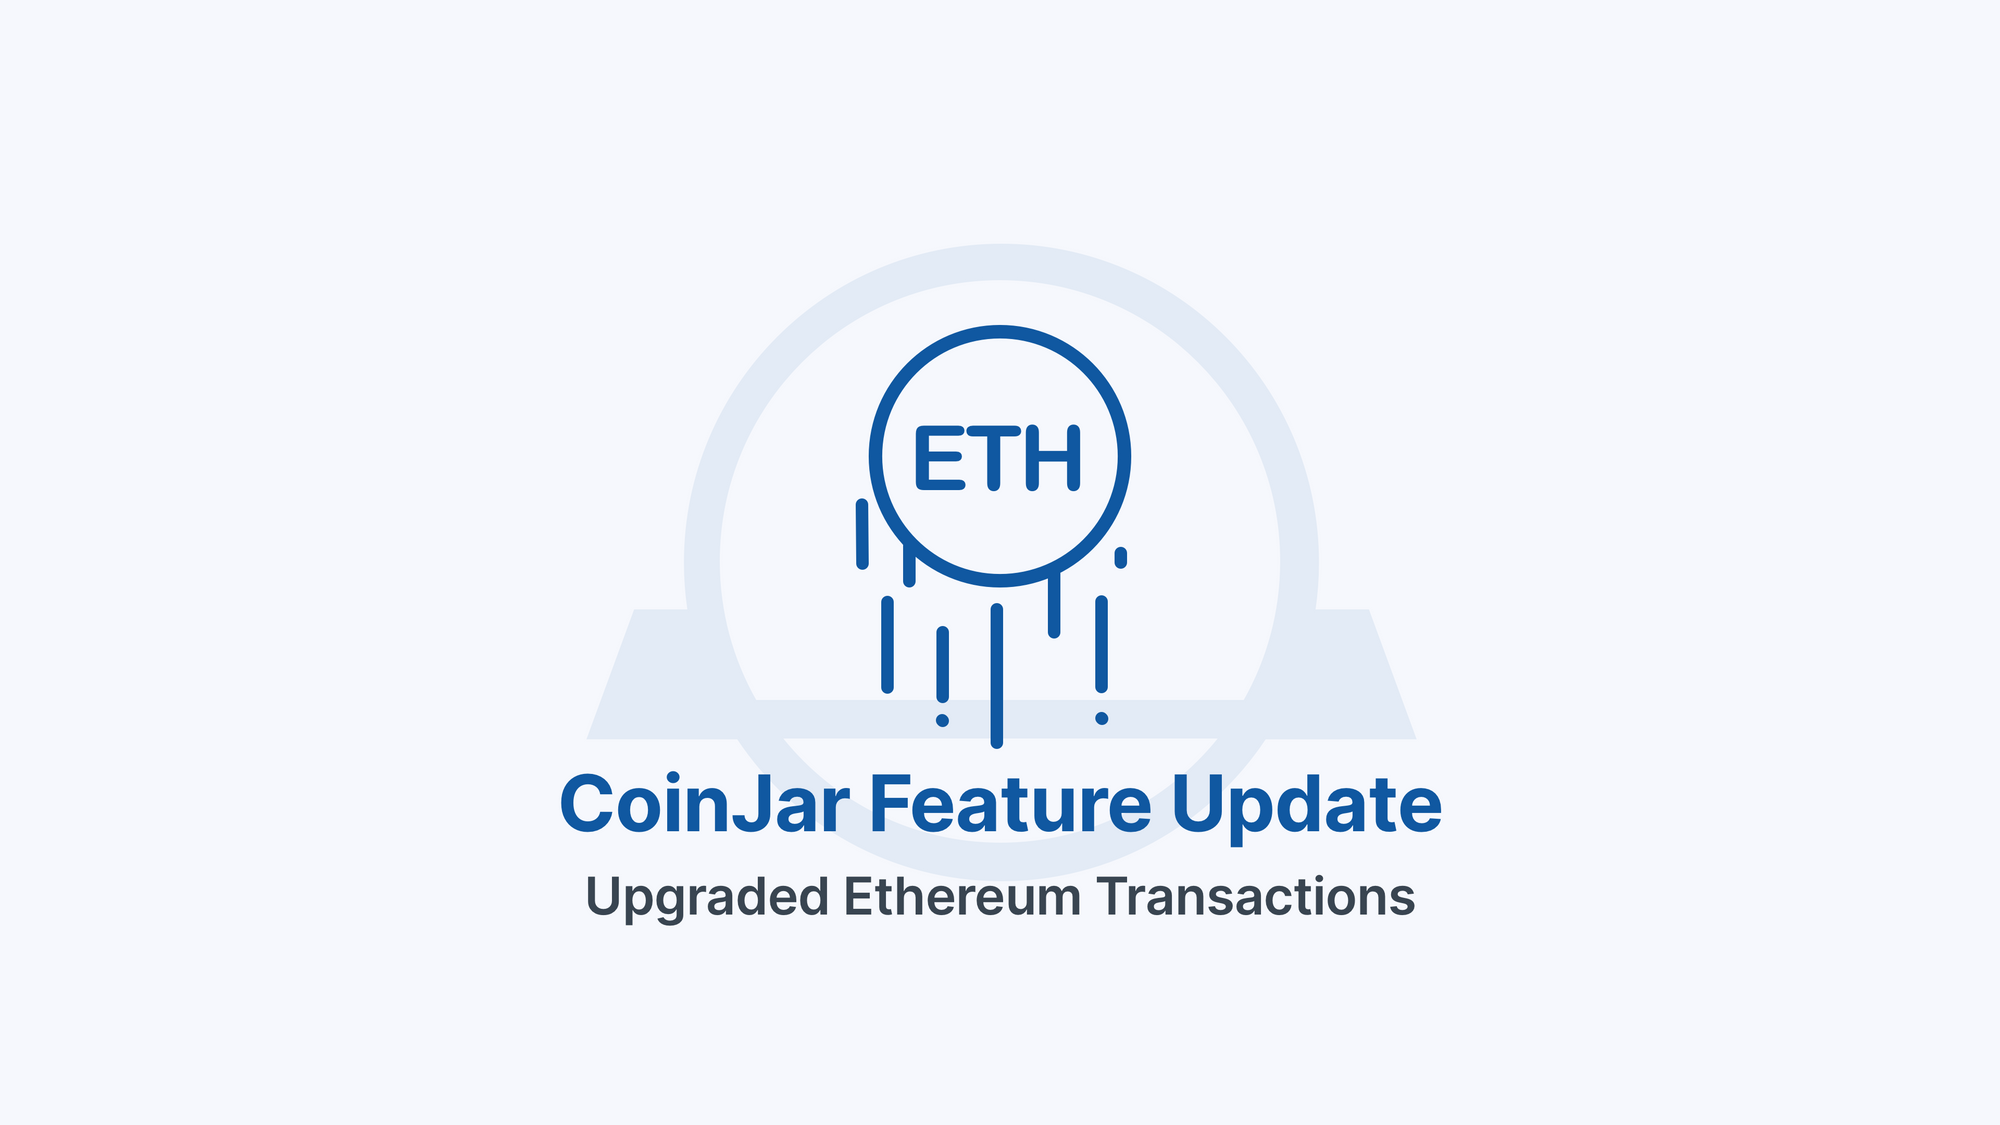 Ethereum withdrawal fees have been lowered